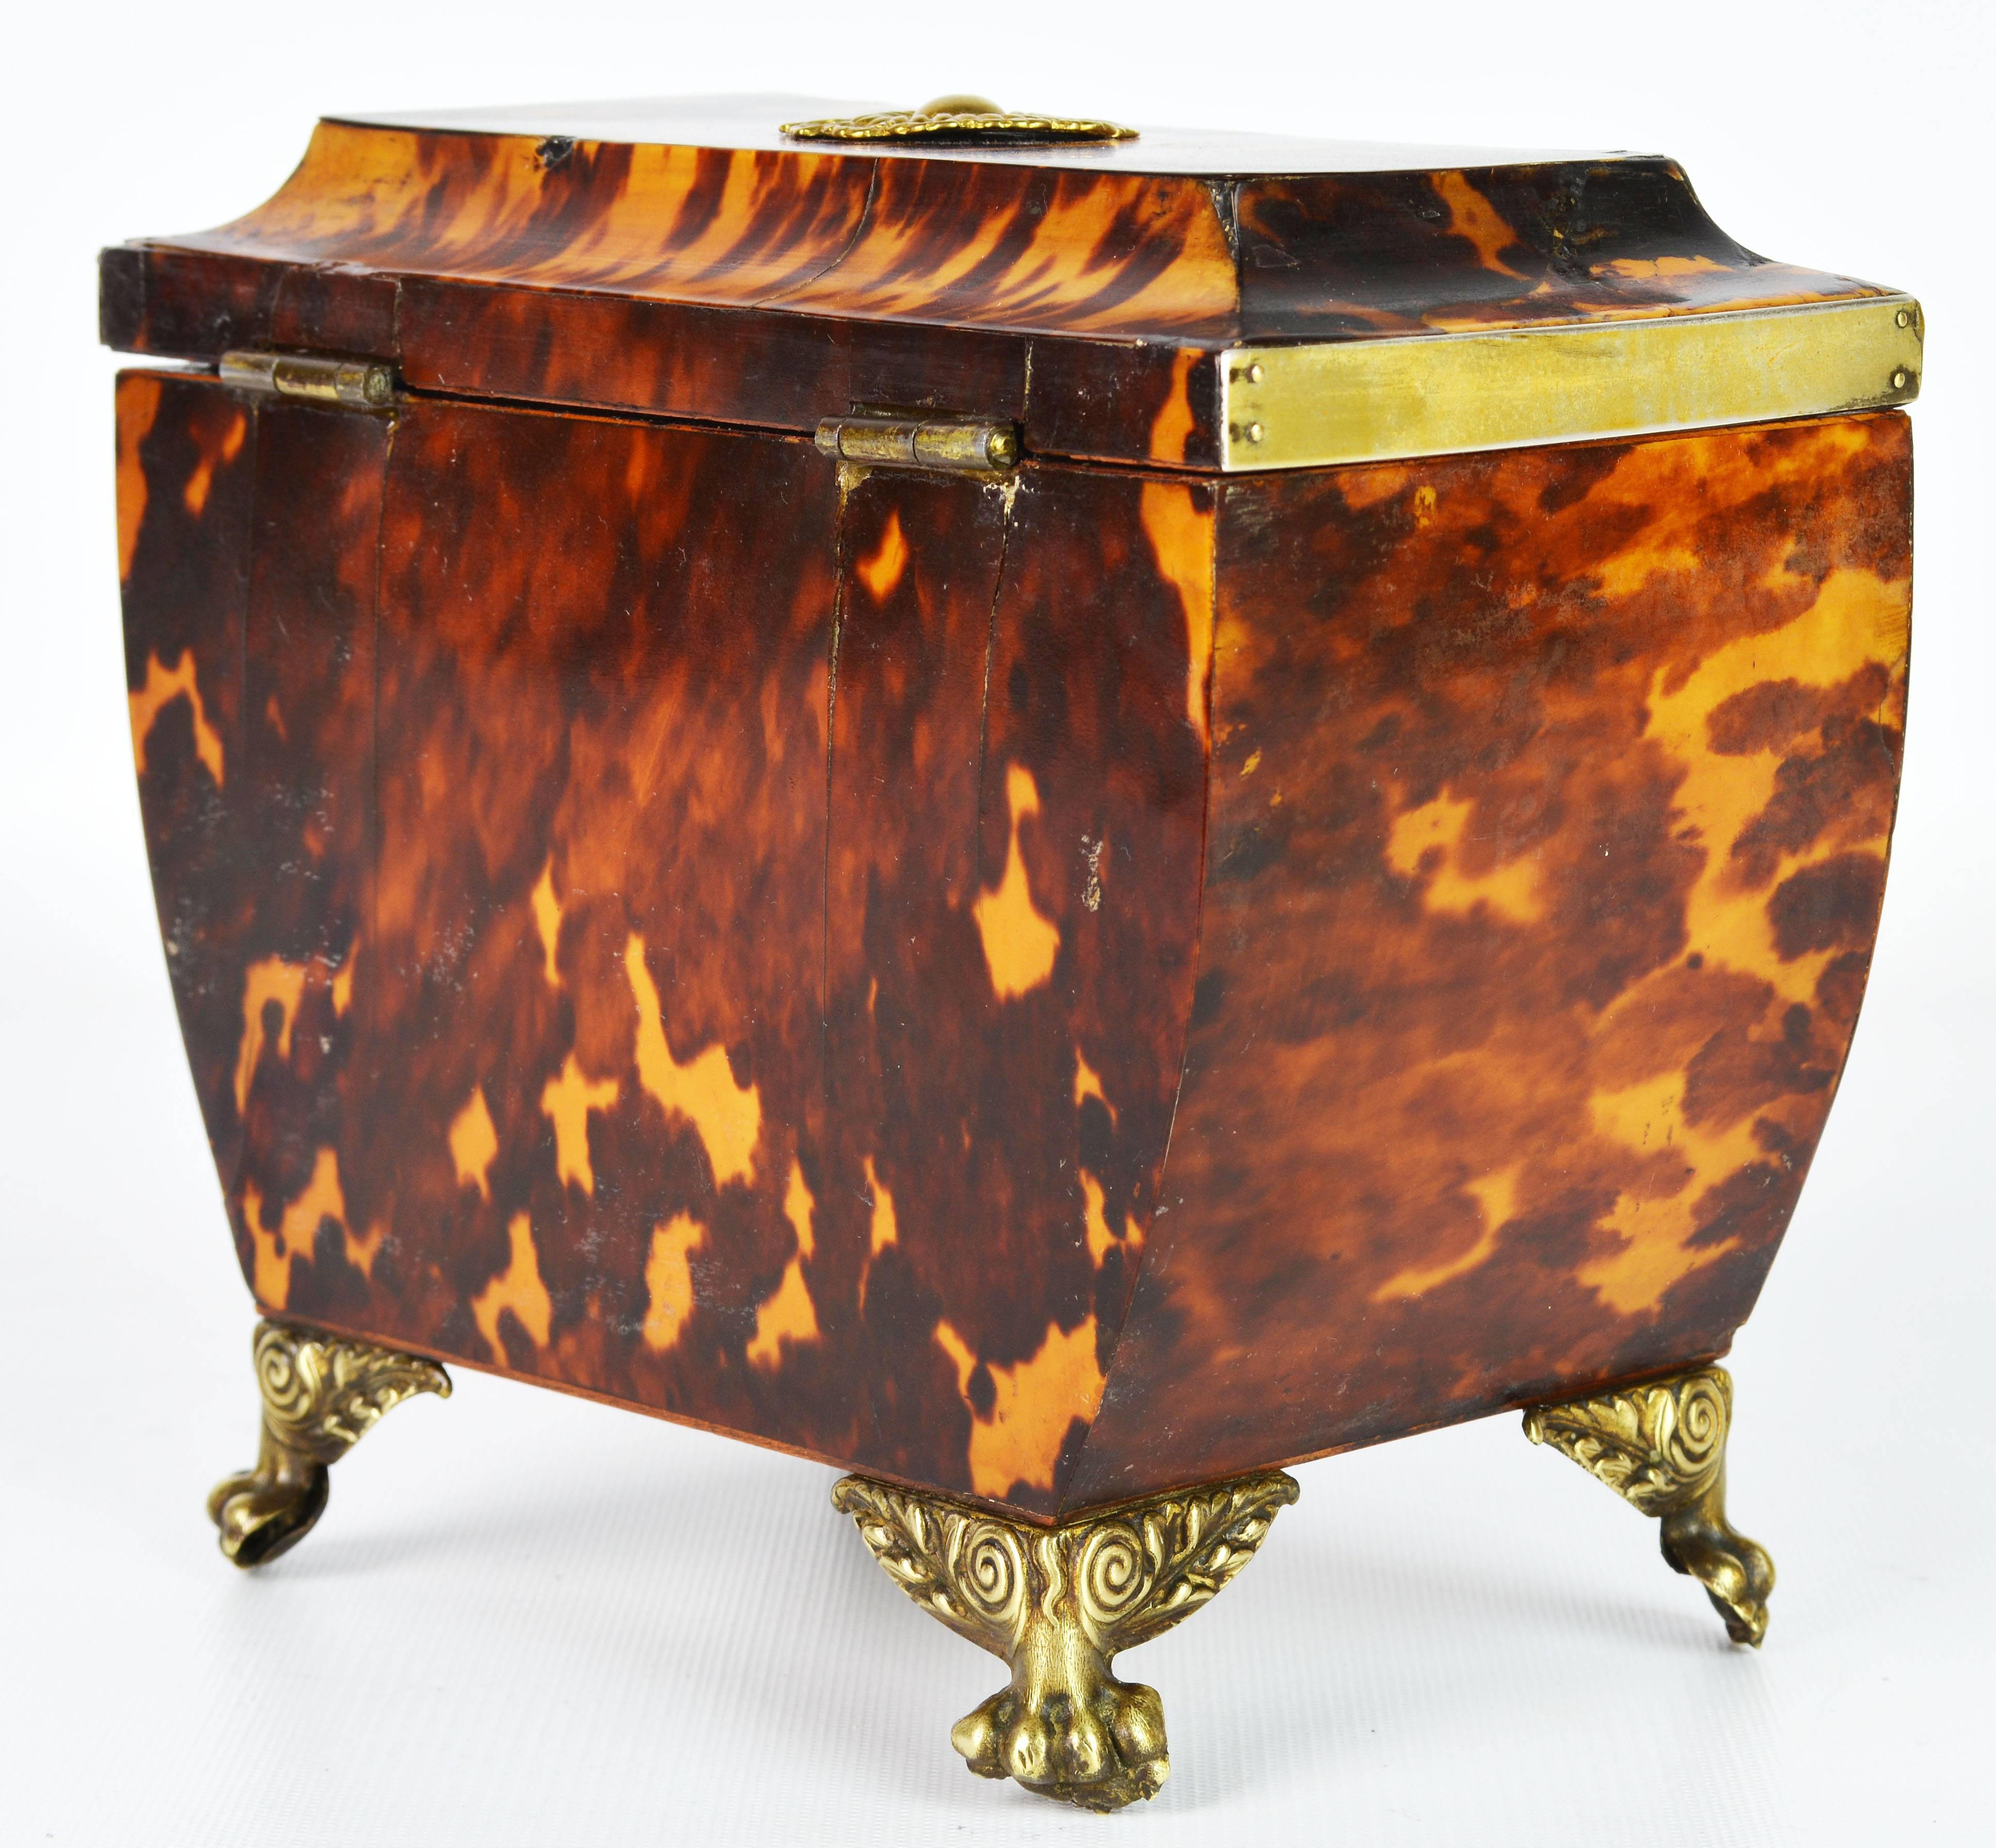 Lovely English Regency Tortoiseshell Footed Tea Caddy with Intach Interior 1